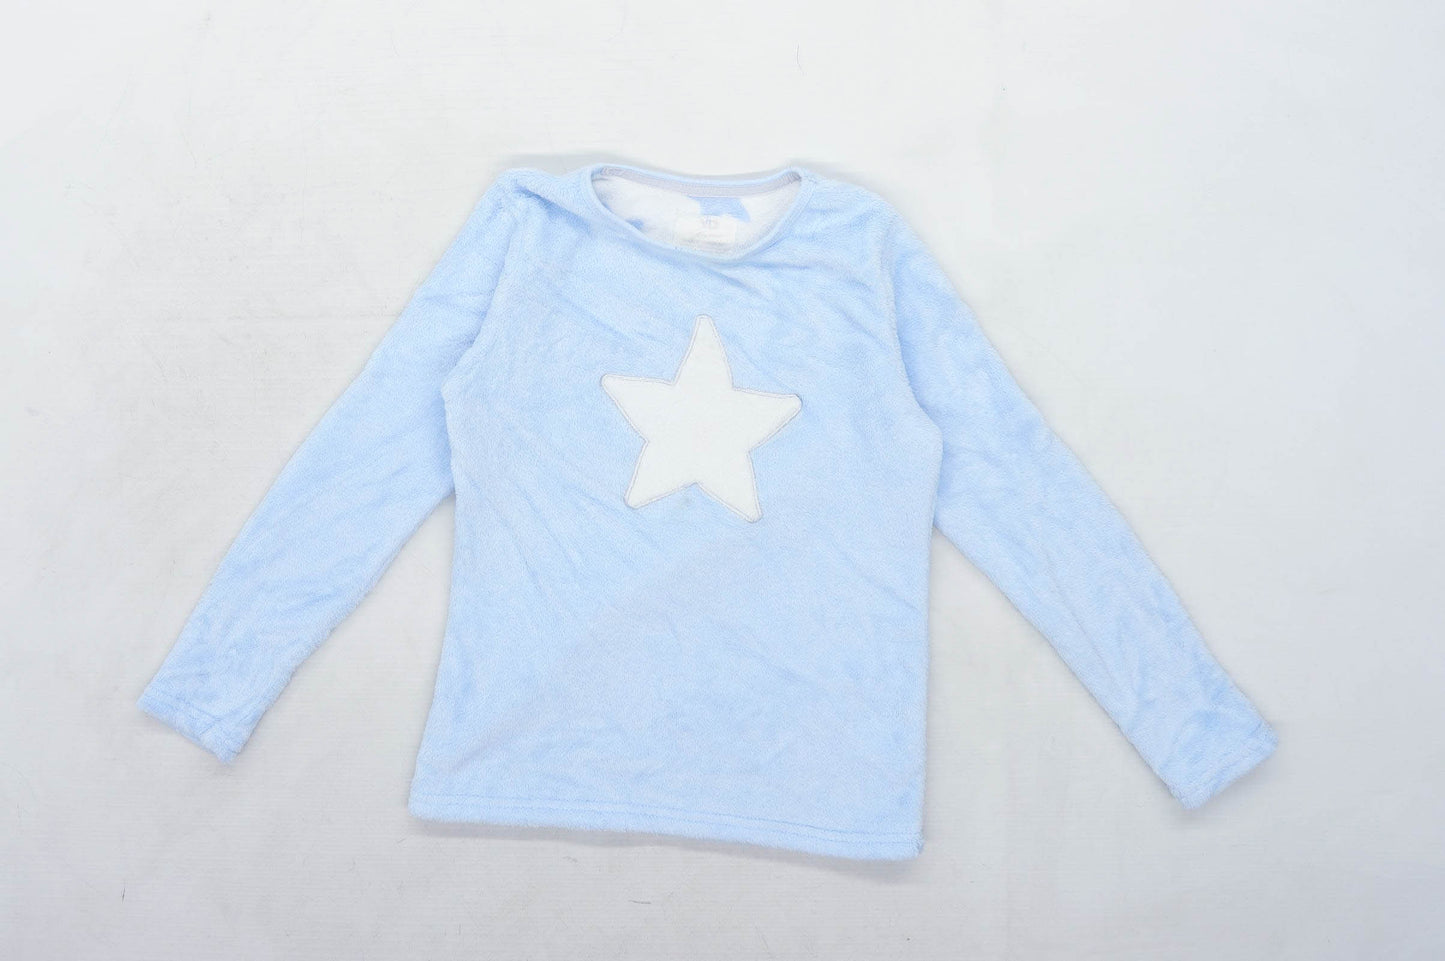 Young Dimension Girls Blue Star Sweatshirt Age 9-10 Years